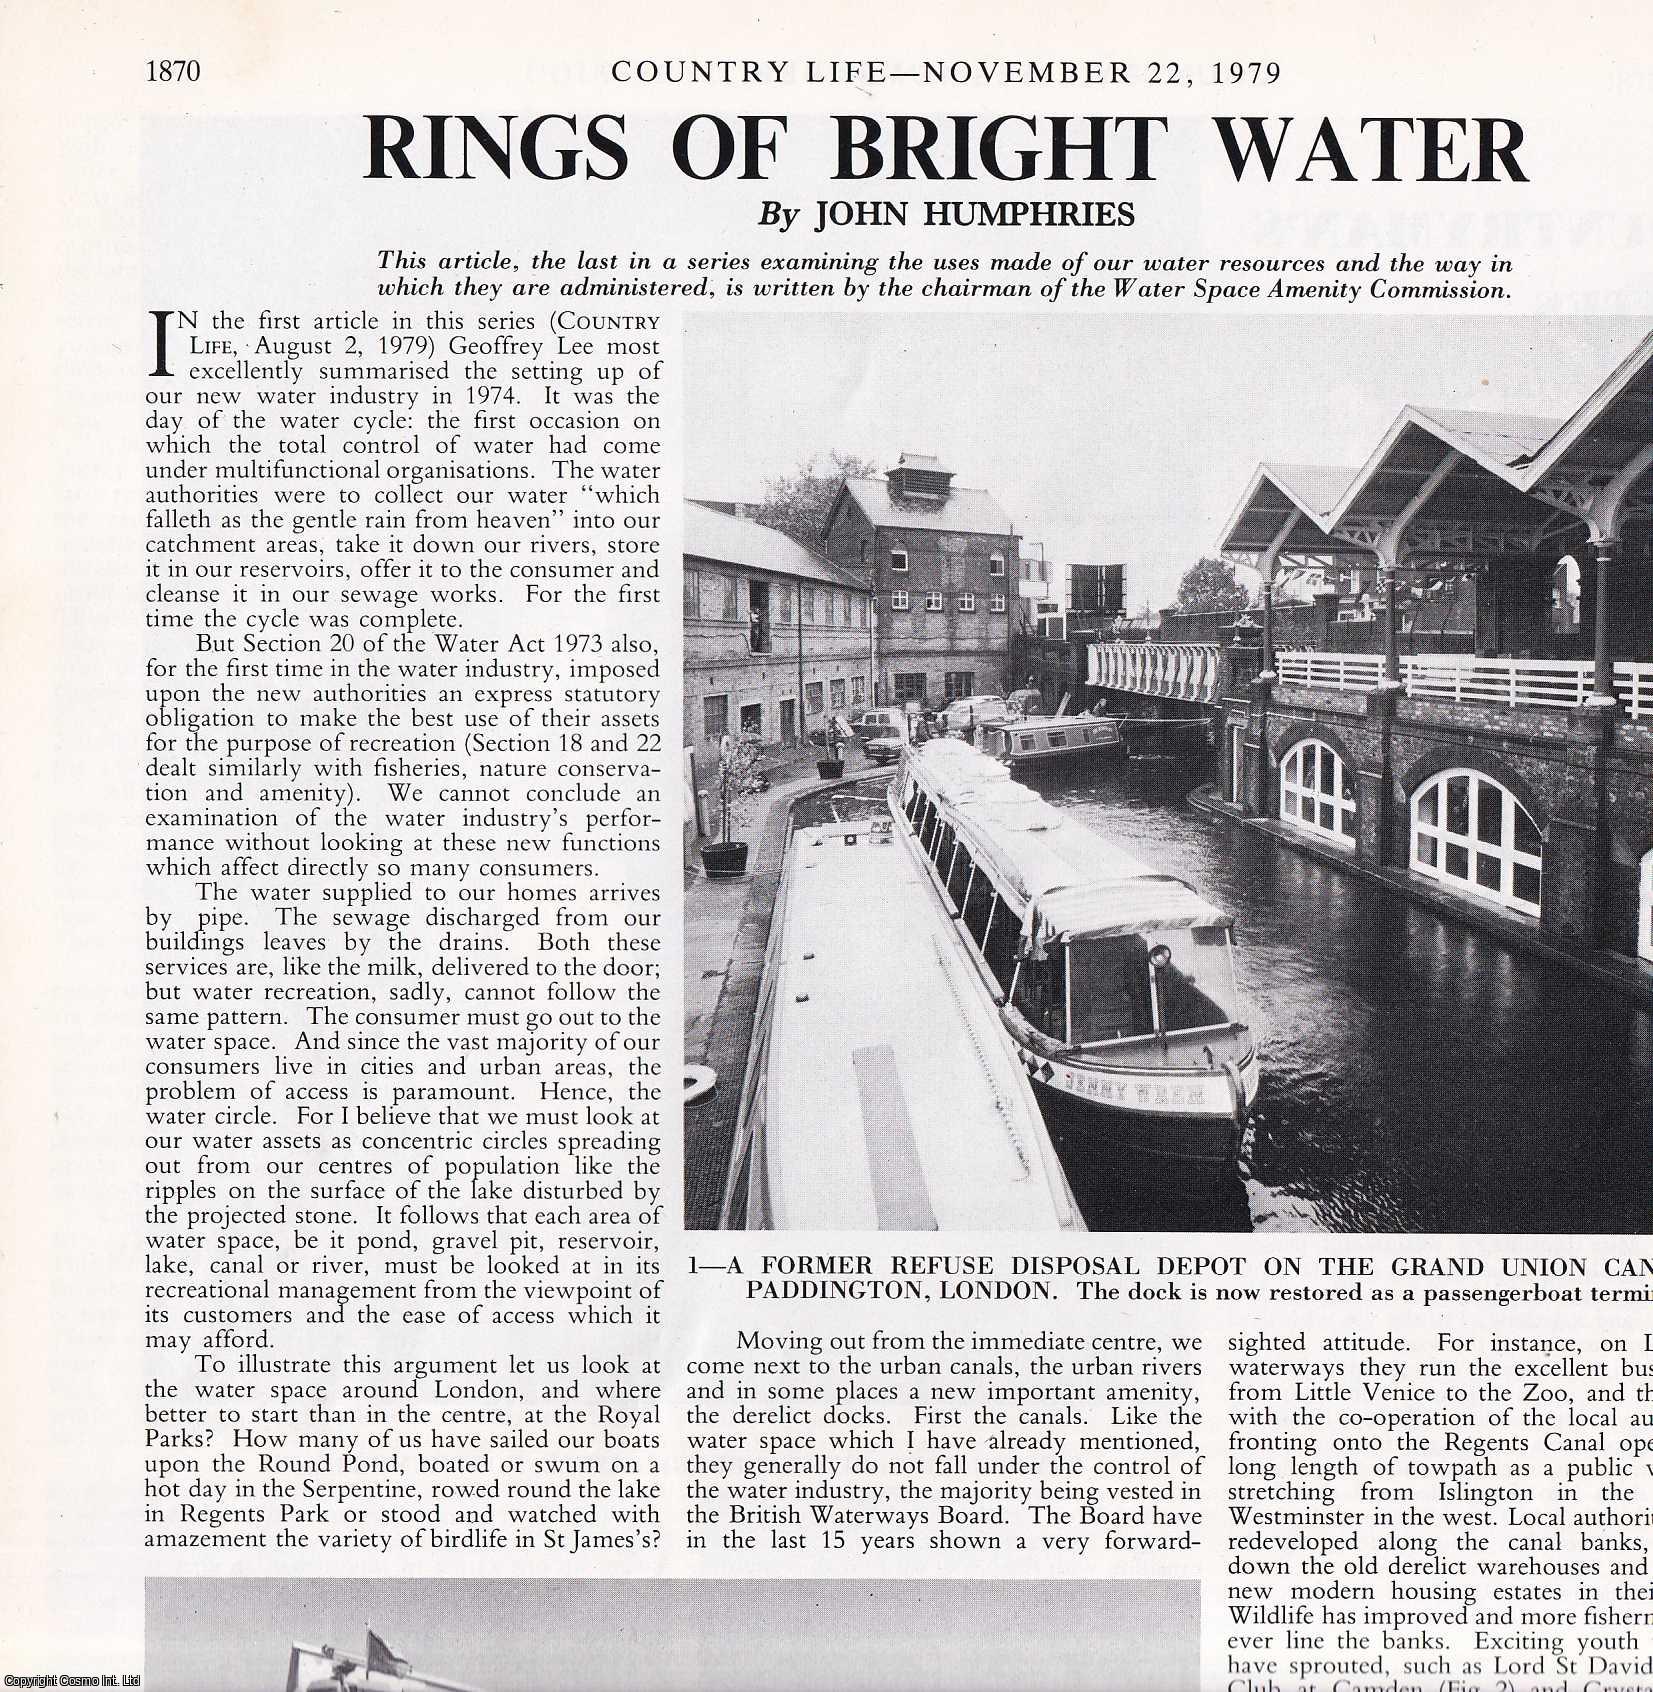 John Humphries - The Recreational Uses of London's Water Sources following the Water Act, 1973. Several pictures and accompanying text, removed from an original issue of Country Life Magazine, 1979.